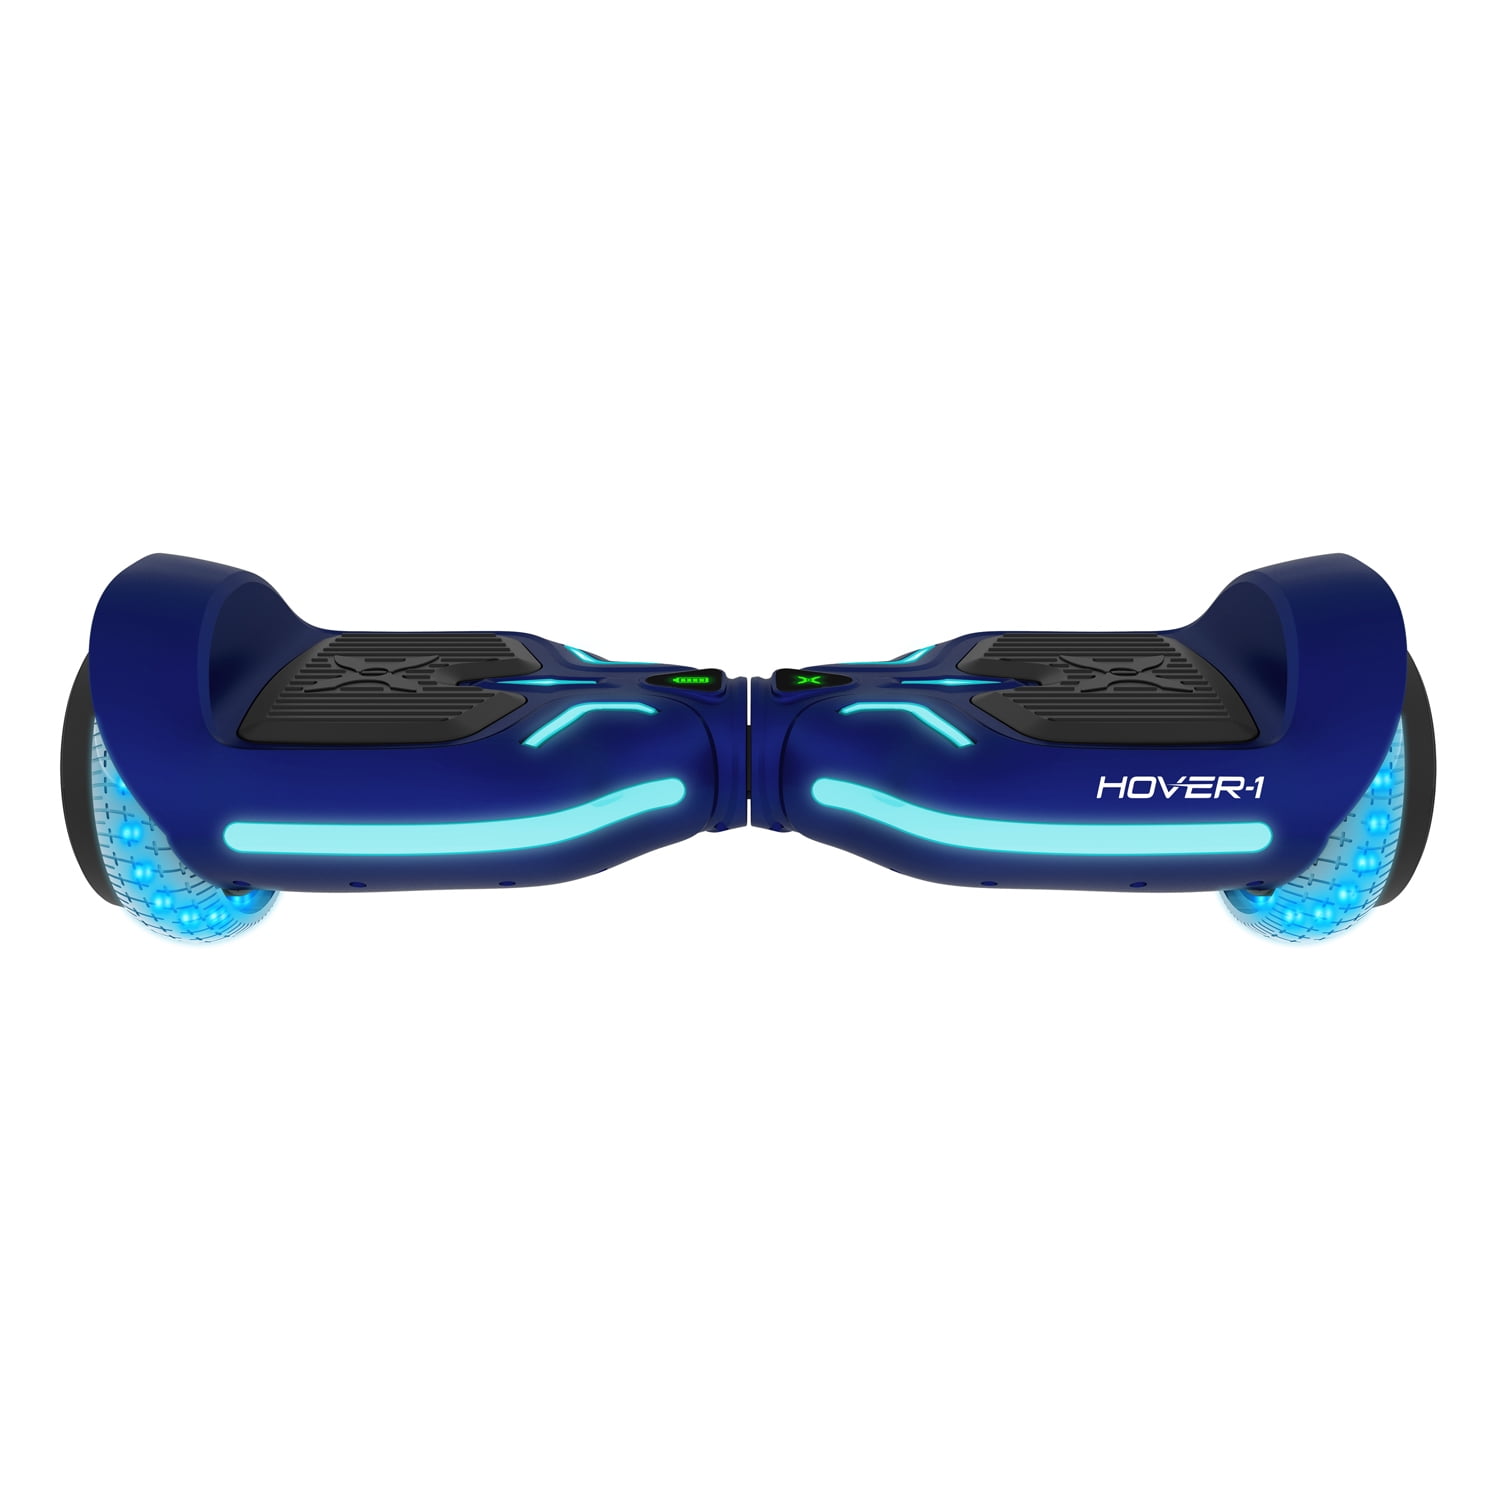 H1-100 Hoverboard Scooter with Infinity LED Wheel Lights Walmart.com